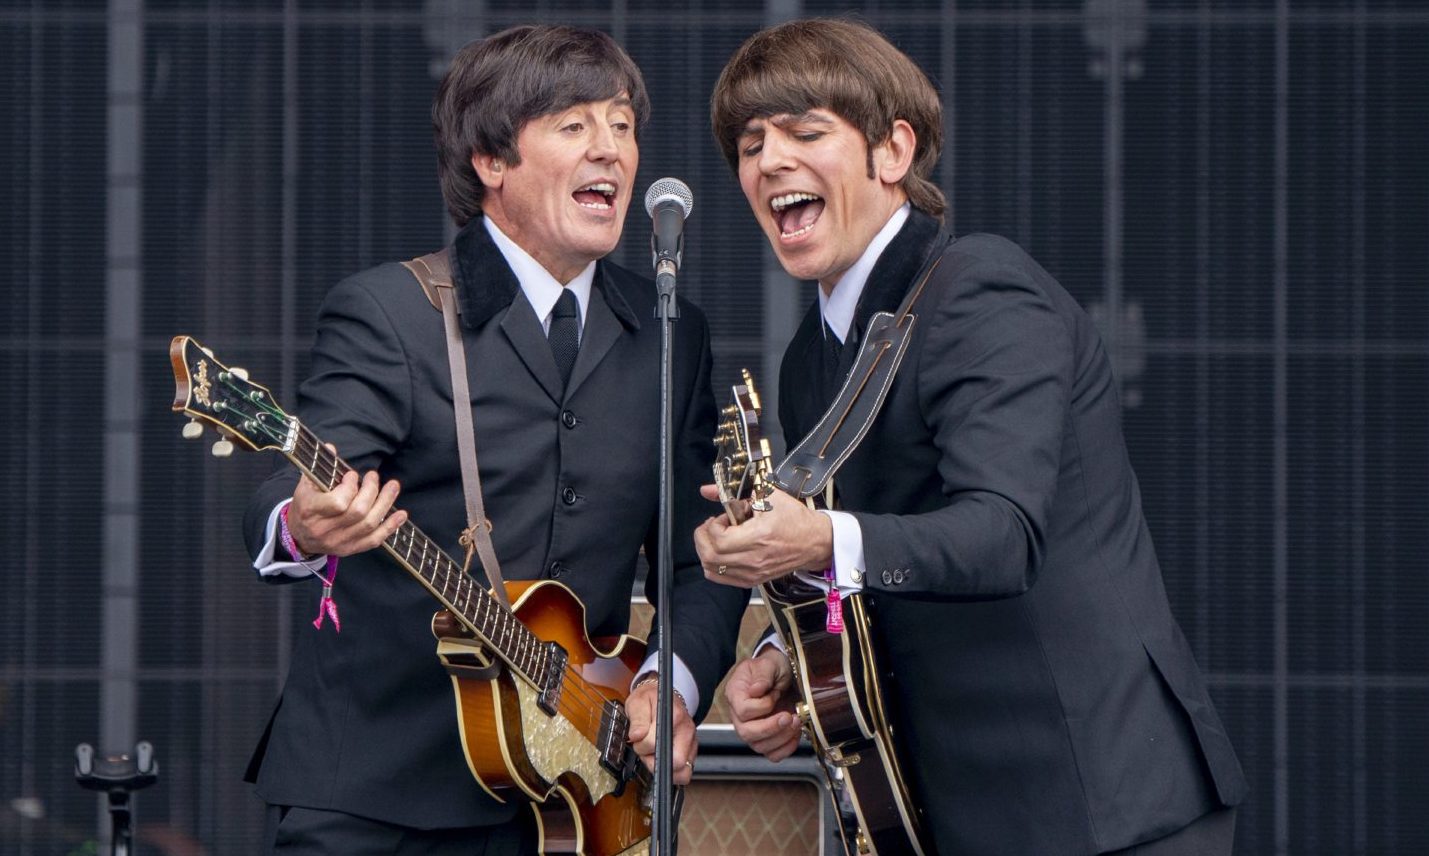 The Bootleg Beatles will perform at Fat Sam's Live